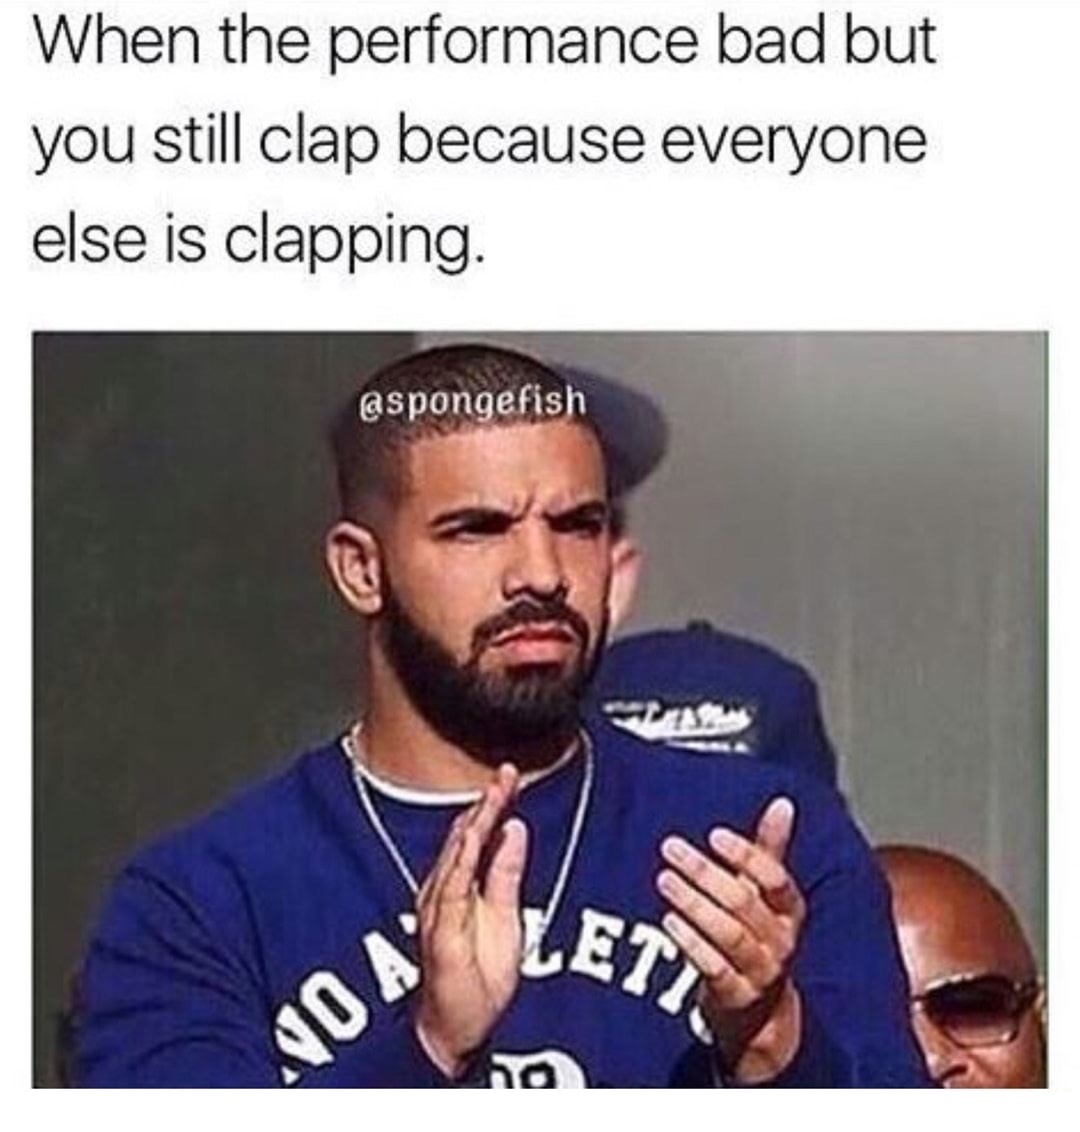 dank meme of drake confused clapping as to how it feels when the performance was bad but you still clap because everyone else is clapping